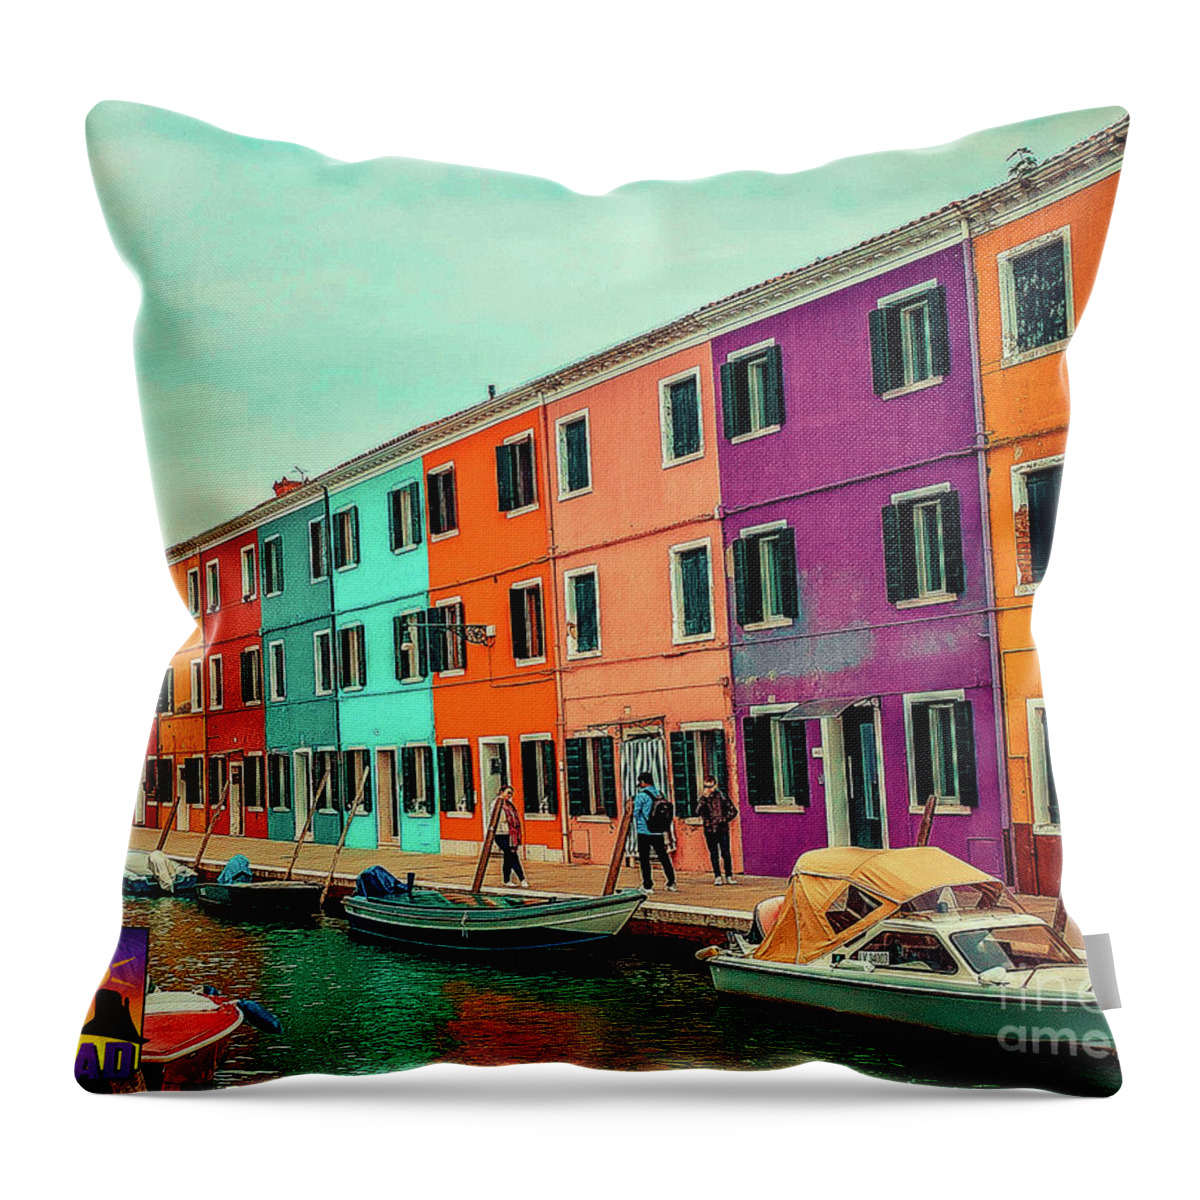  Throw Pillow featuring the photograph Burano, Italy #2 by Ken Arcia